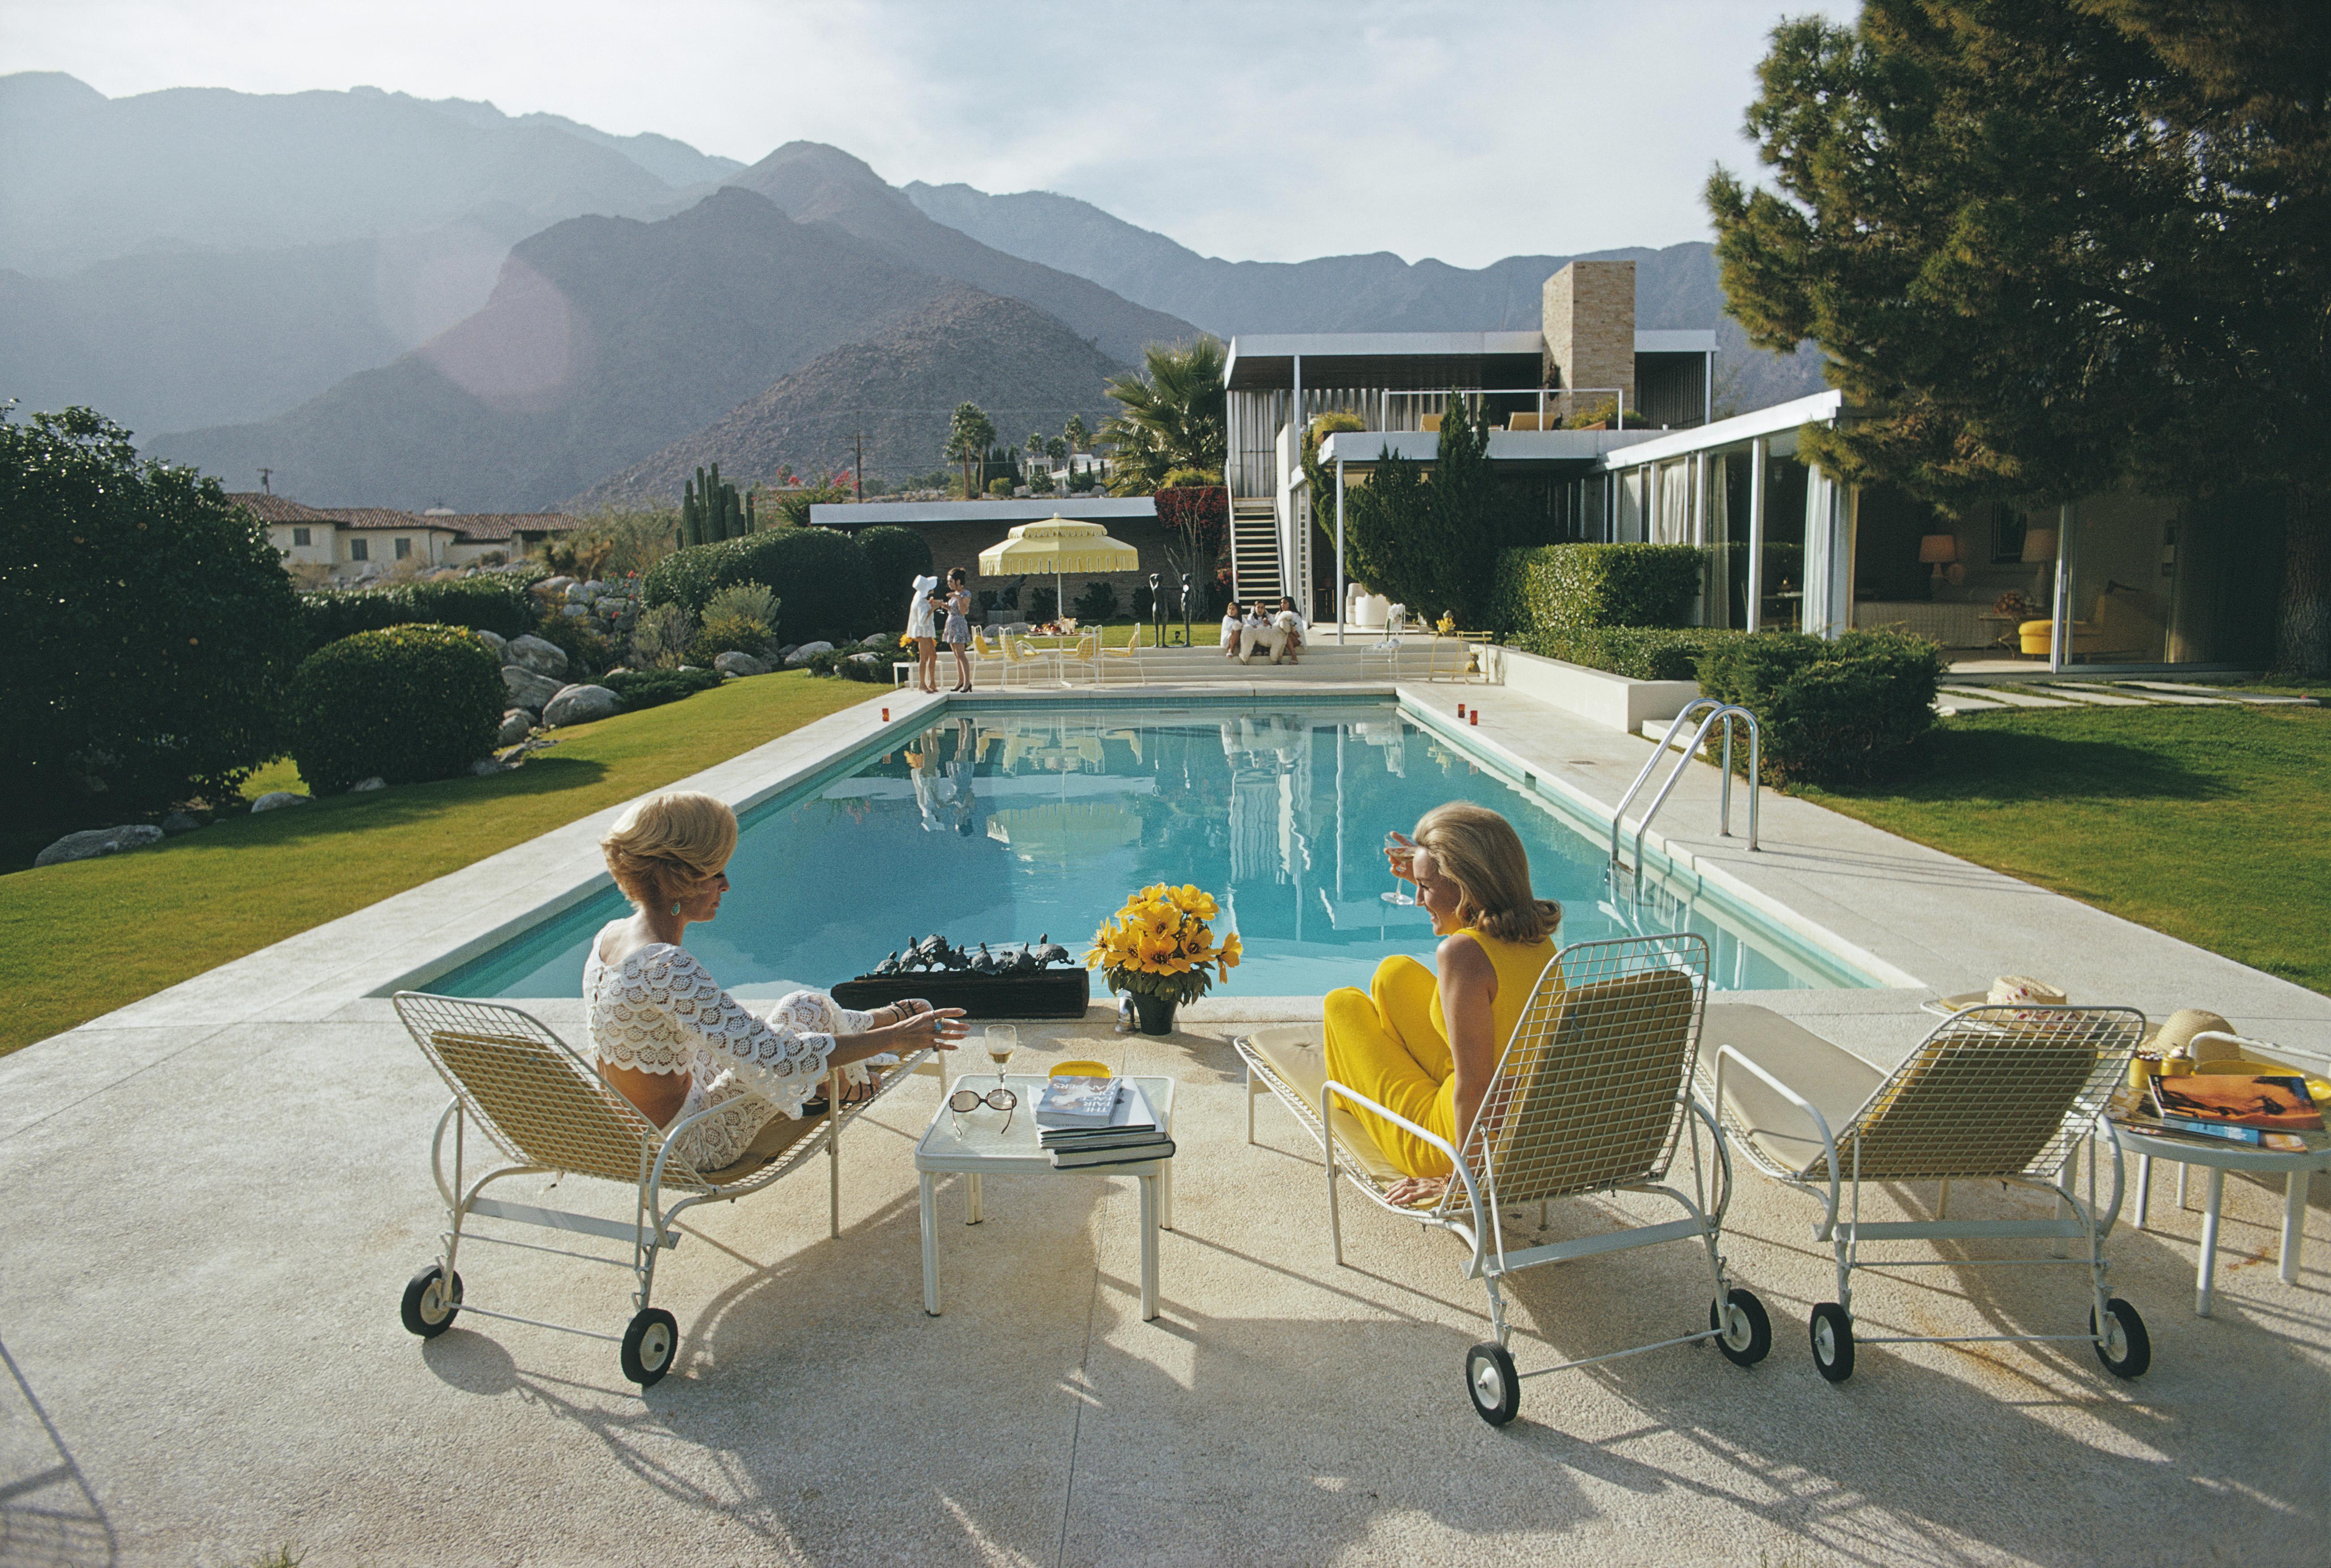 'Poolside Pairs' Slim Aarons Limited Edition Estate Stamped Print, Printed Later

Former fashion model Helen Dzo Dzo Kaptur (in white lace) and Nelda Linsk (in yellow), wife of art dealer Joseph Linsk, at the Kaufmann Desert House in Palm Springs,